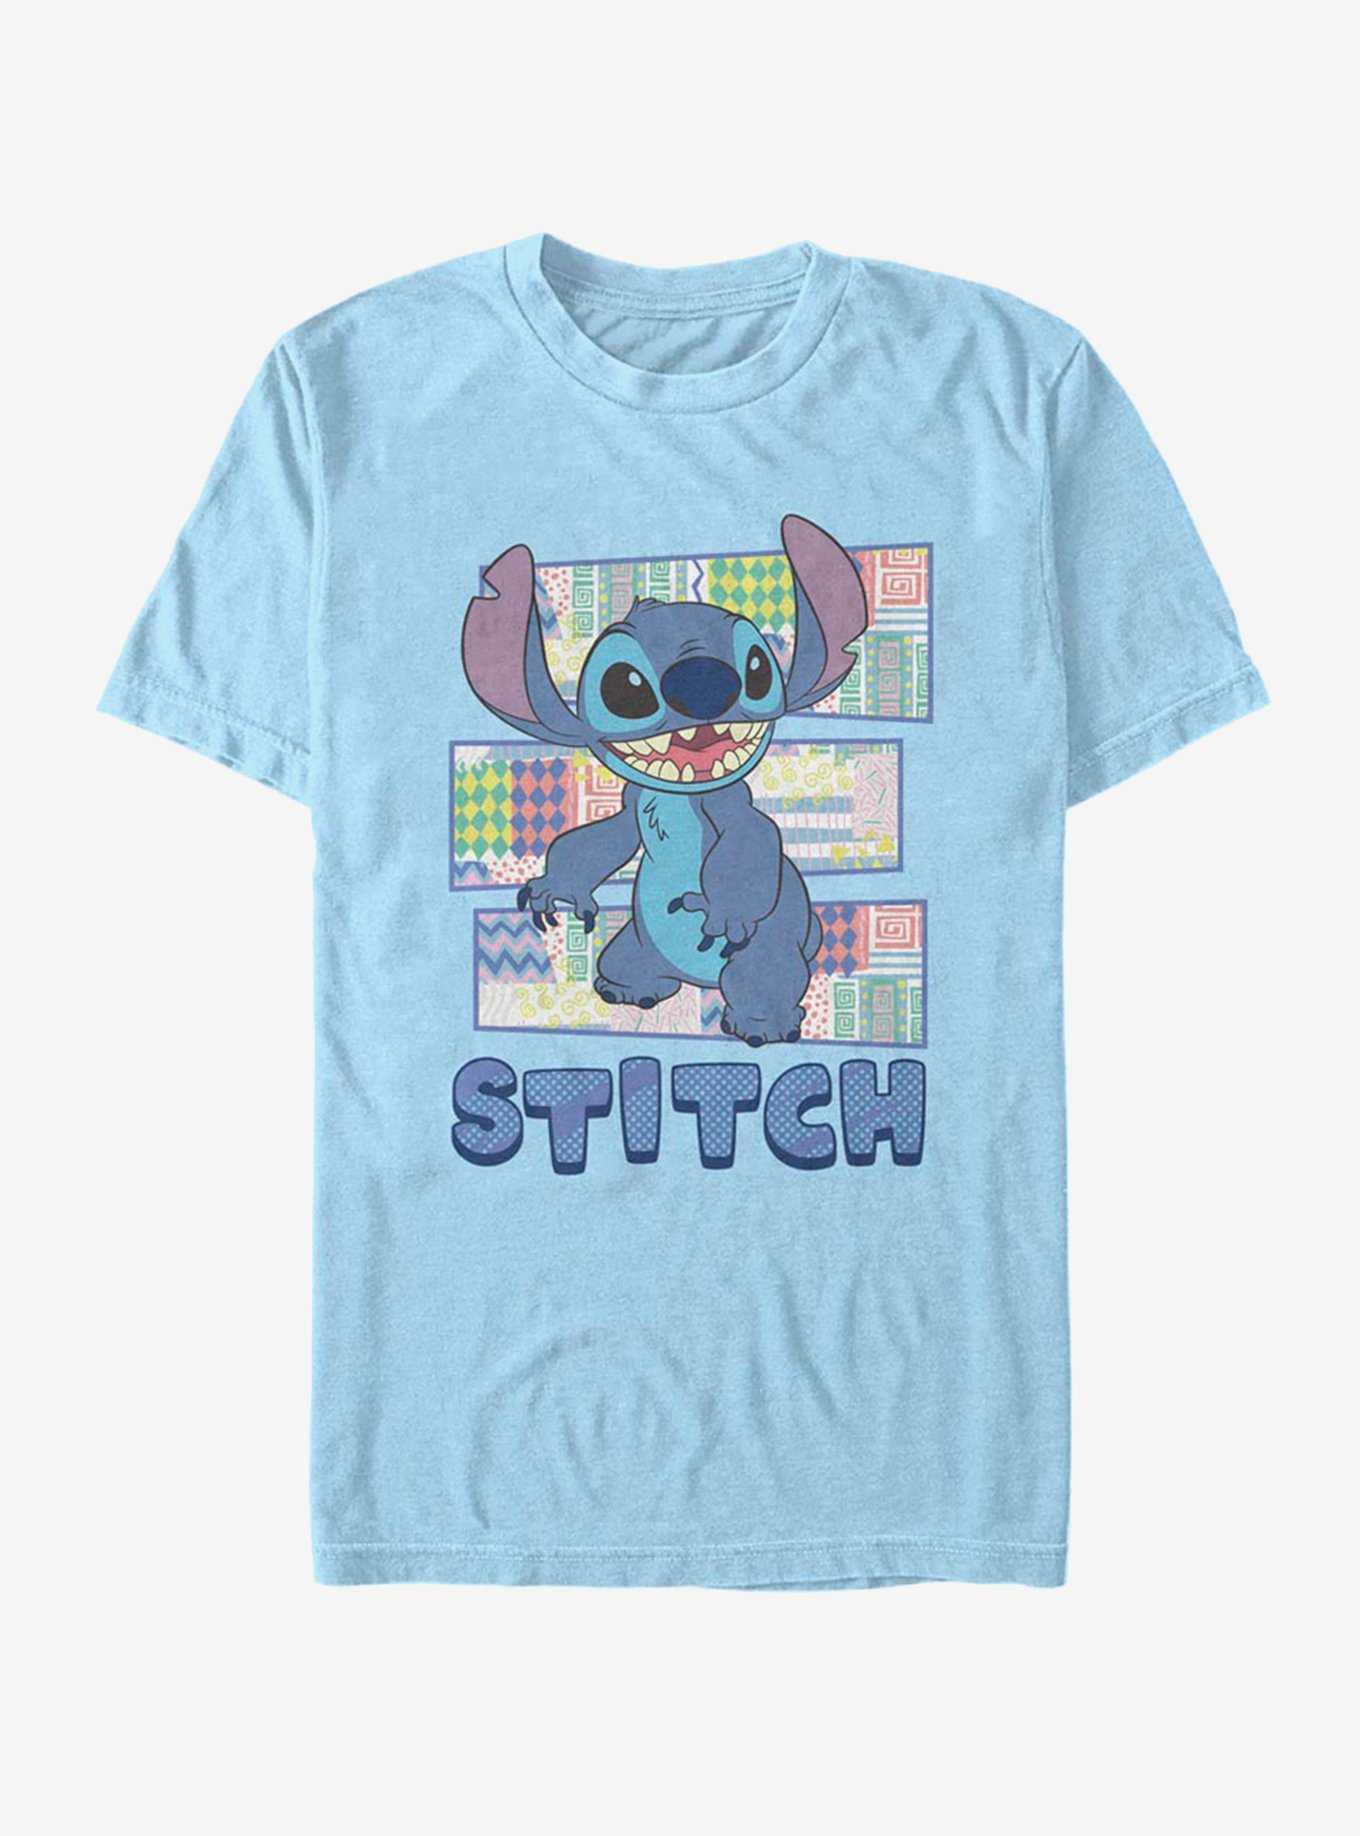 Disney Lilo & Stitch Character Shirt With Pattern T-Shirt, , hi-res